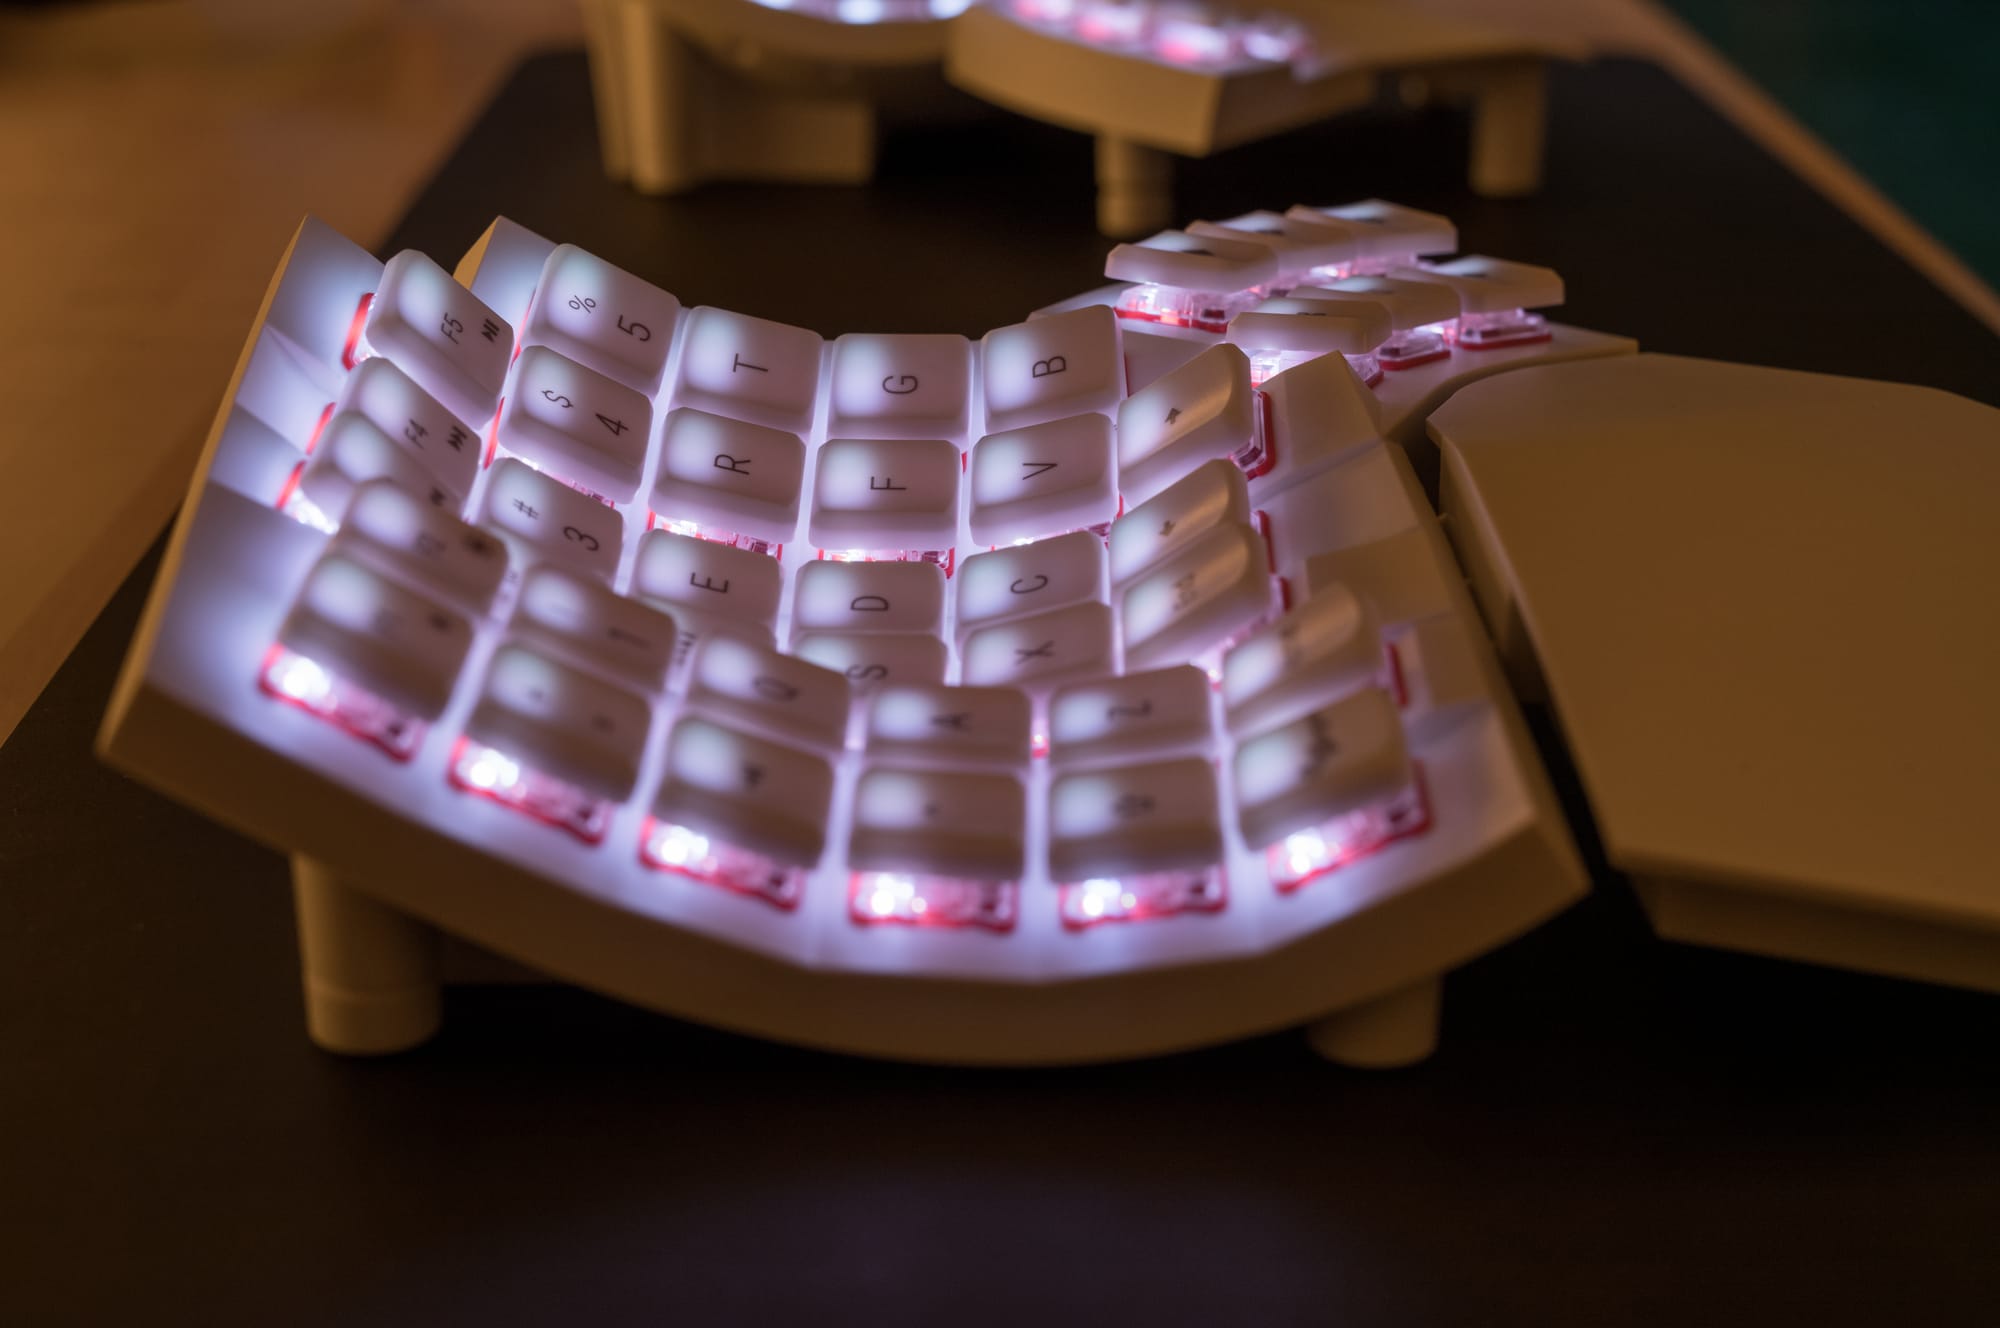 Review of the MoErgo Glove80 keyboard